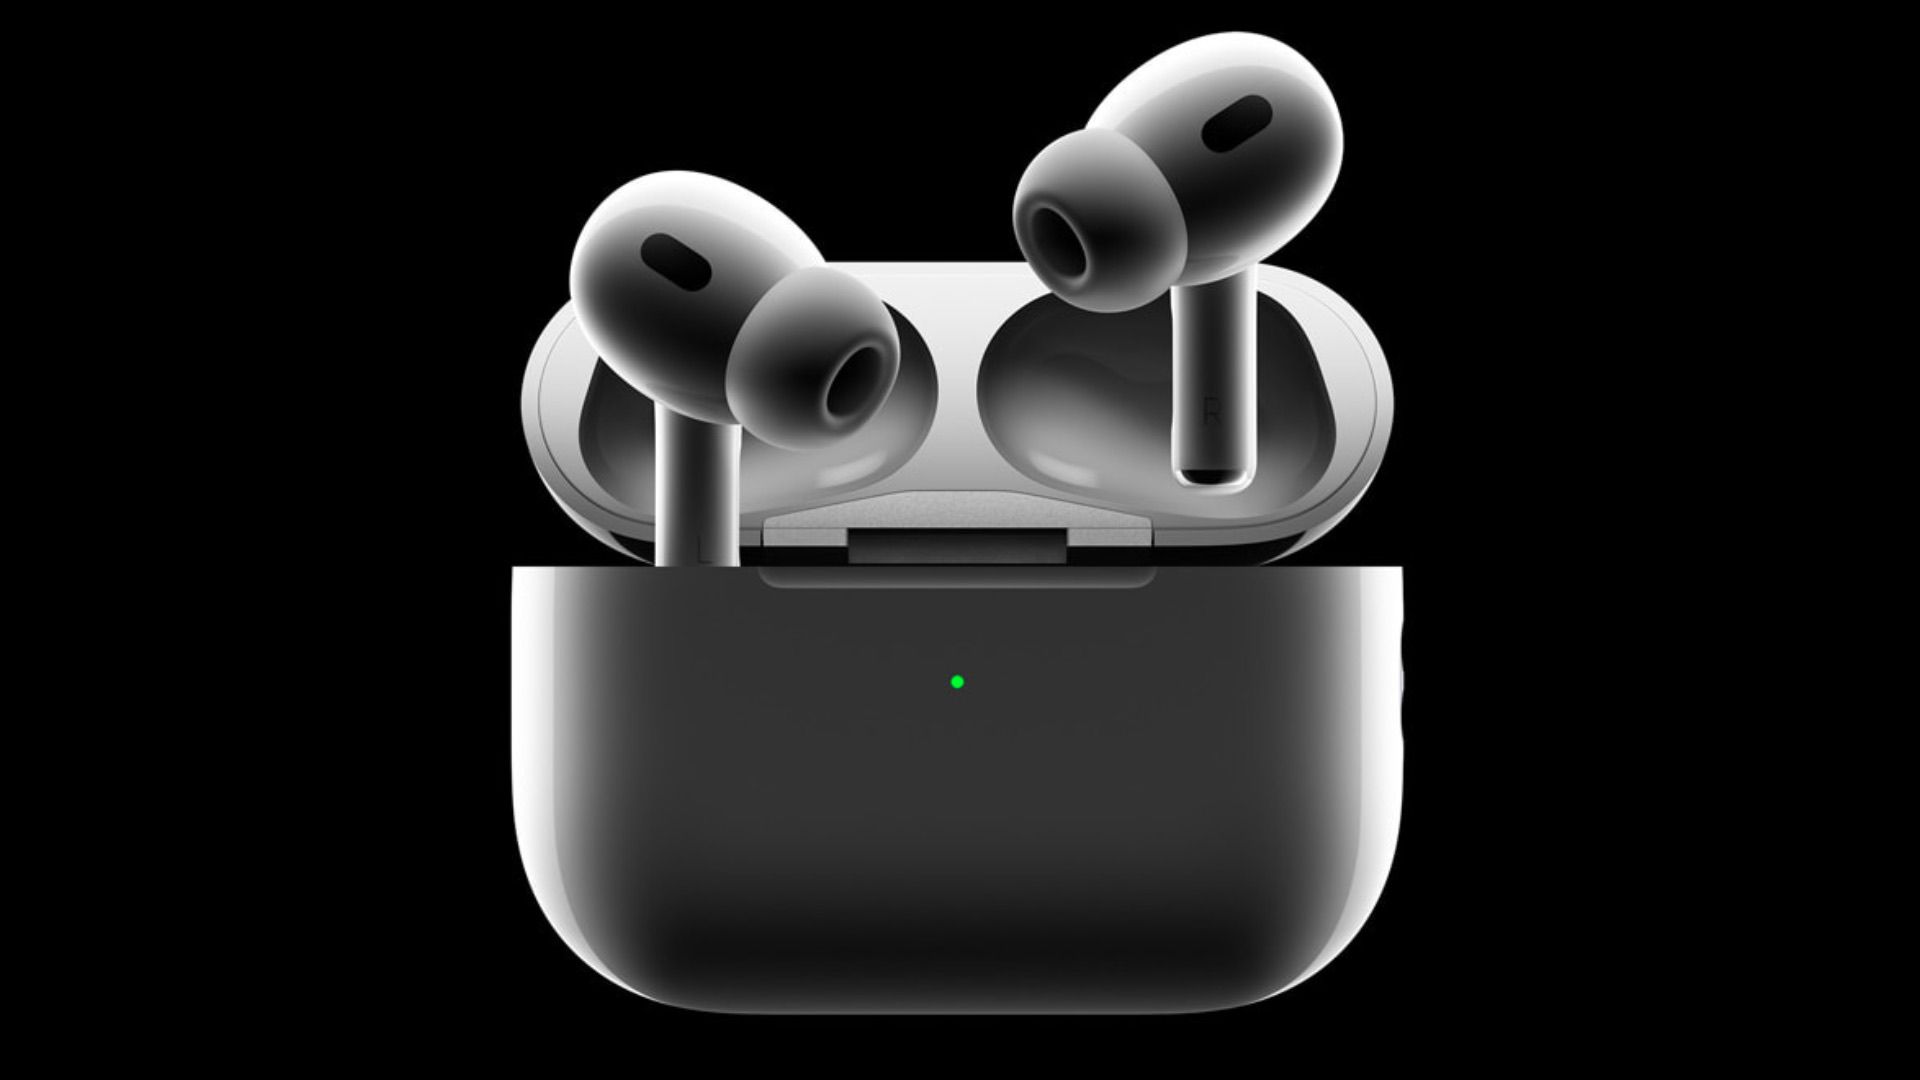 Kuo: AirPods Pro With USB-C Charging Case to Launch Later This Year